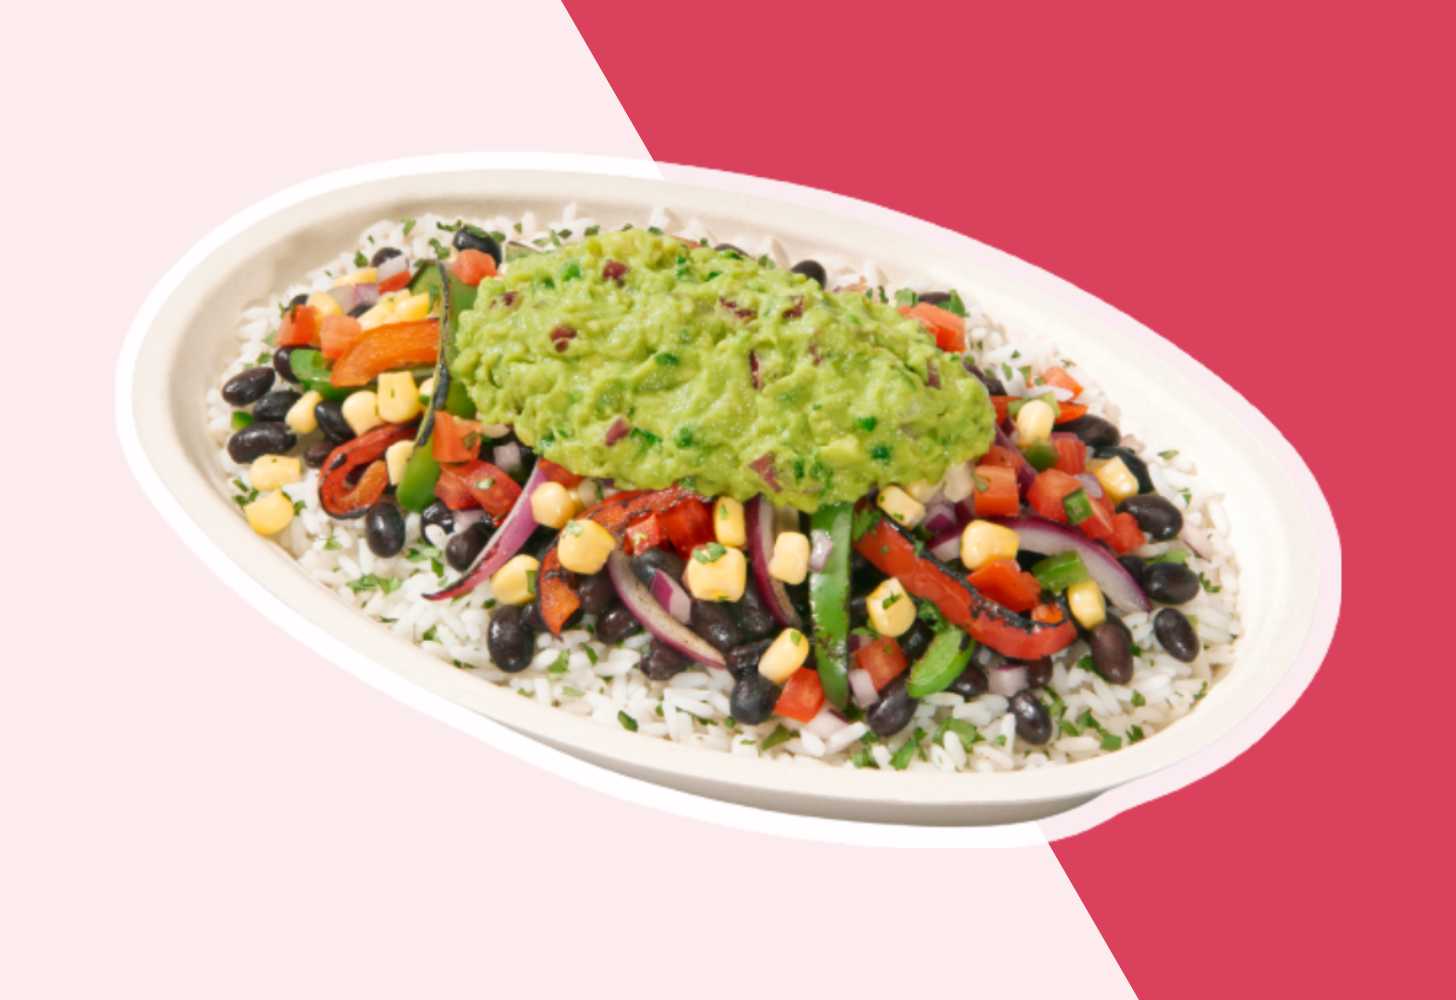 Veggie burrito Bowl with Guac from Chipotle